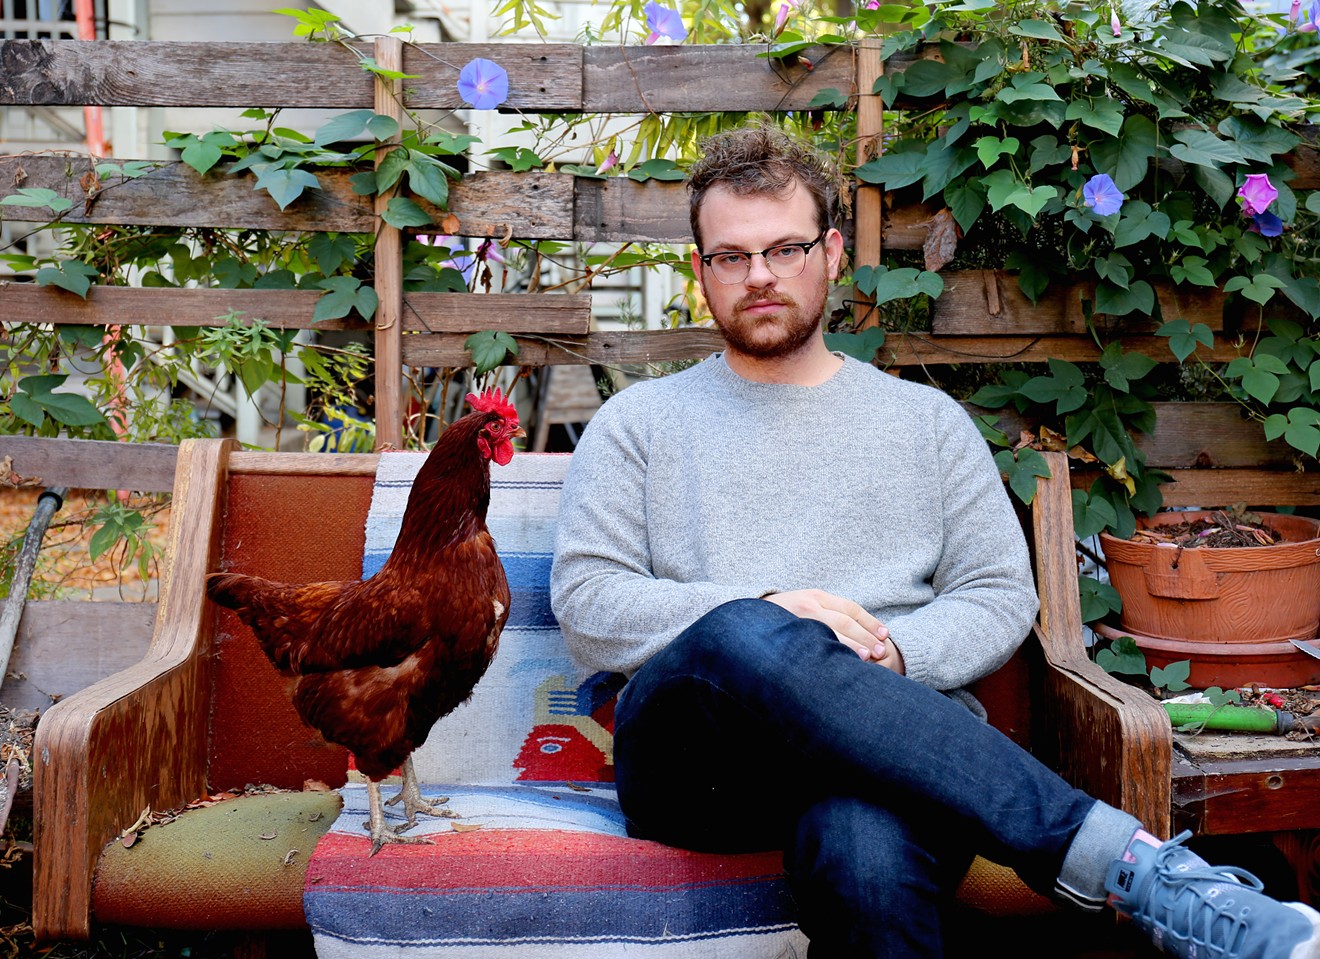 Stephen Steinbrink is scheduled to perform on Thursday, December 6, at The Rebel Lounge.